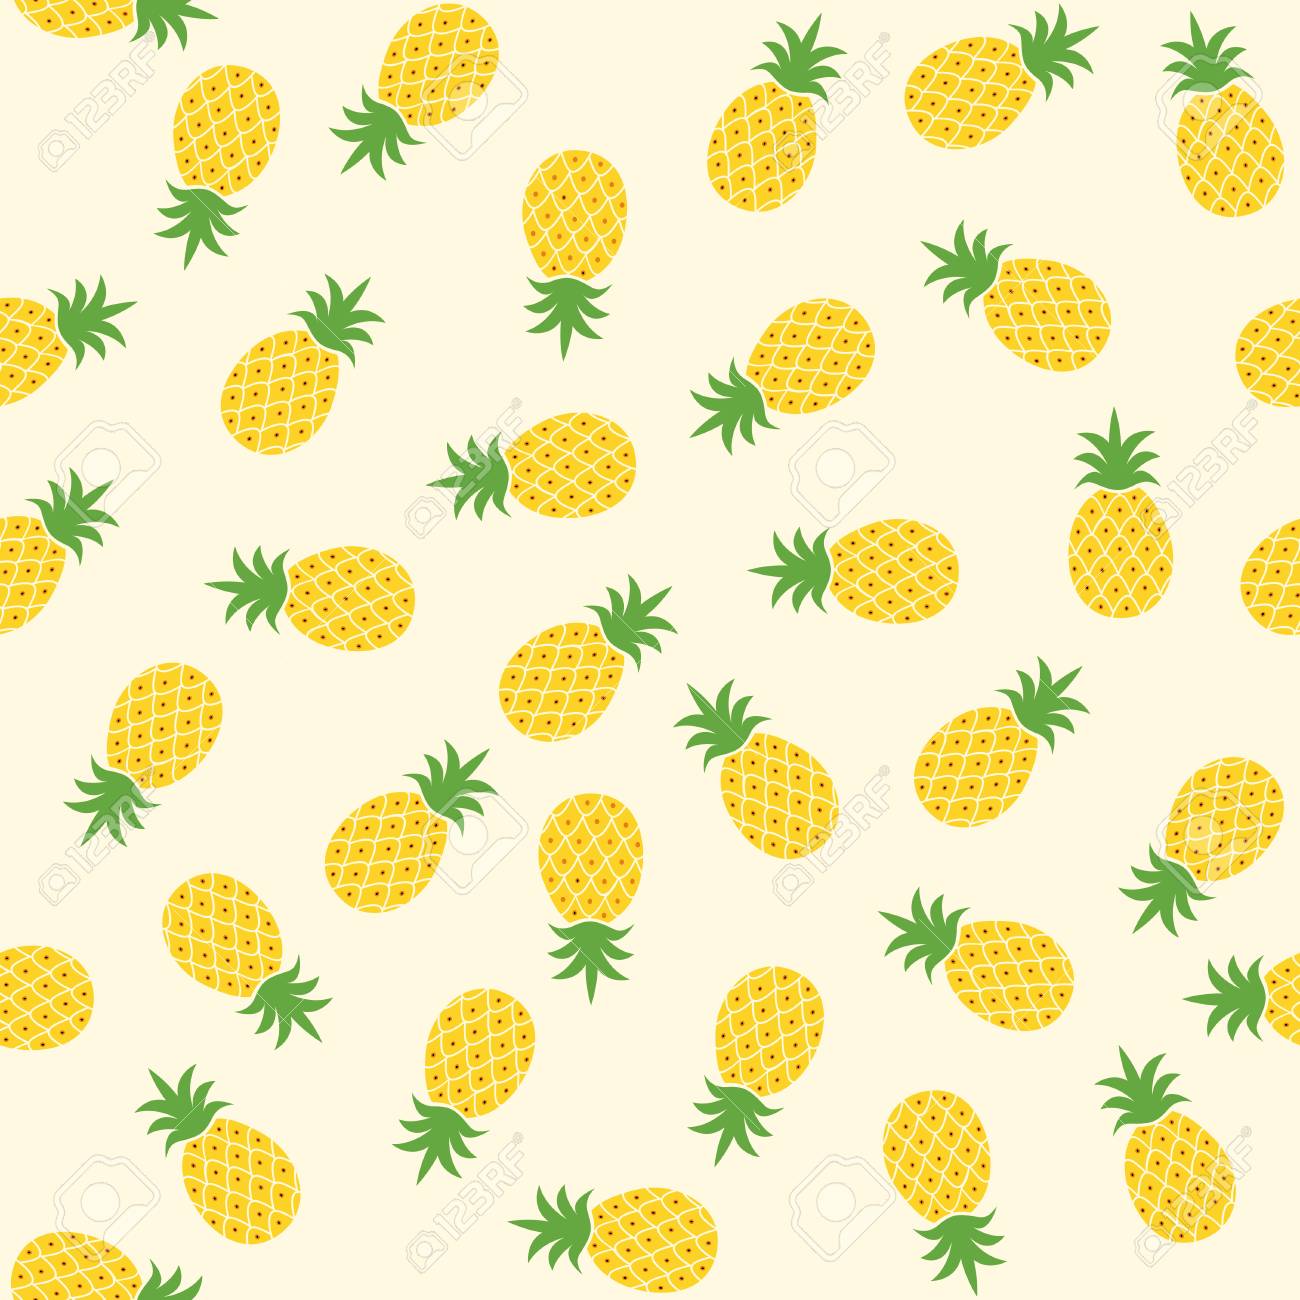 Seamless Pineapple Pattern Cute Pineapple Doodle Pattern For